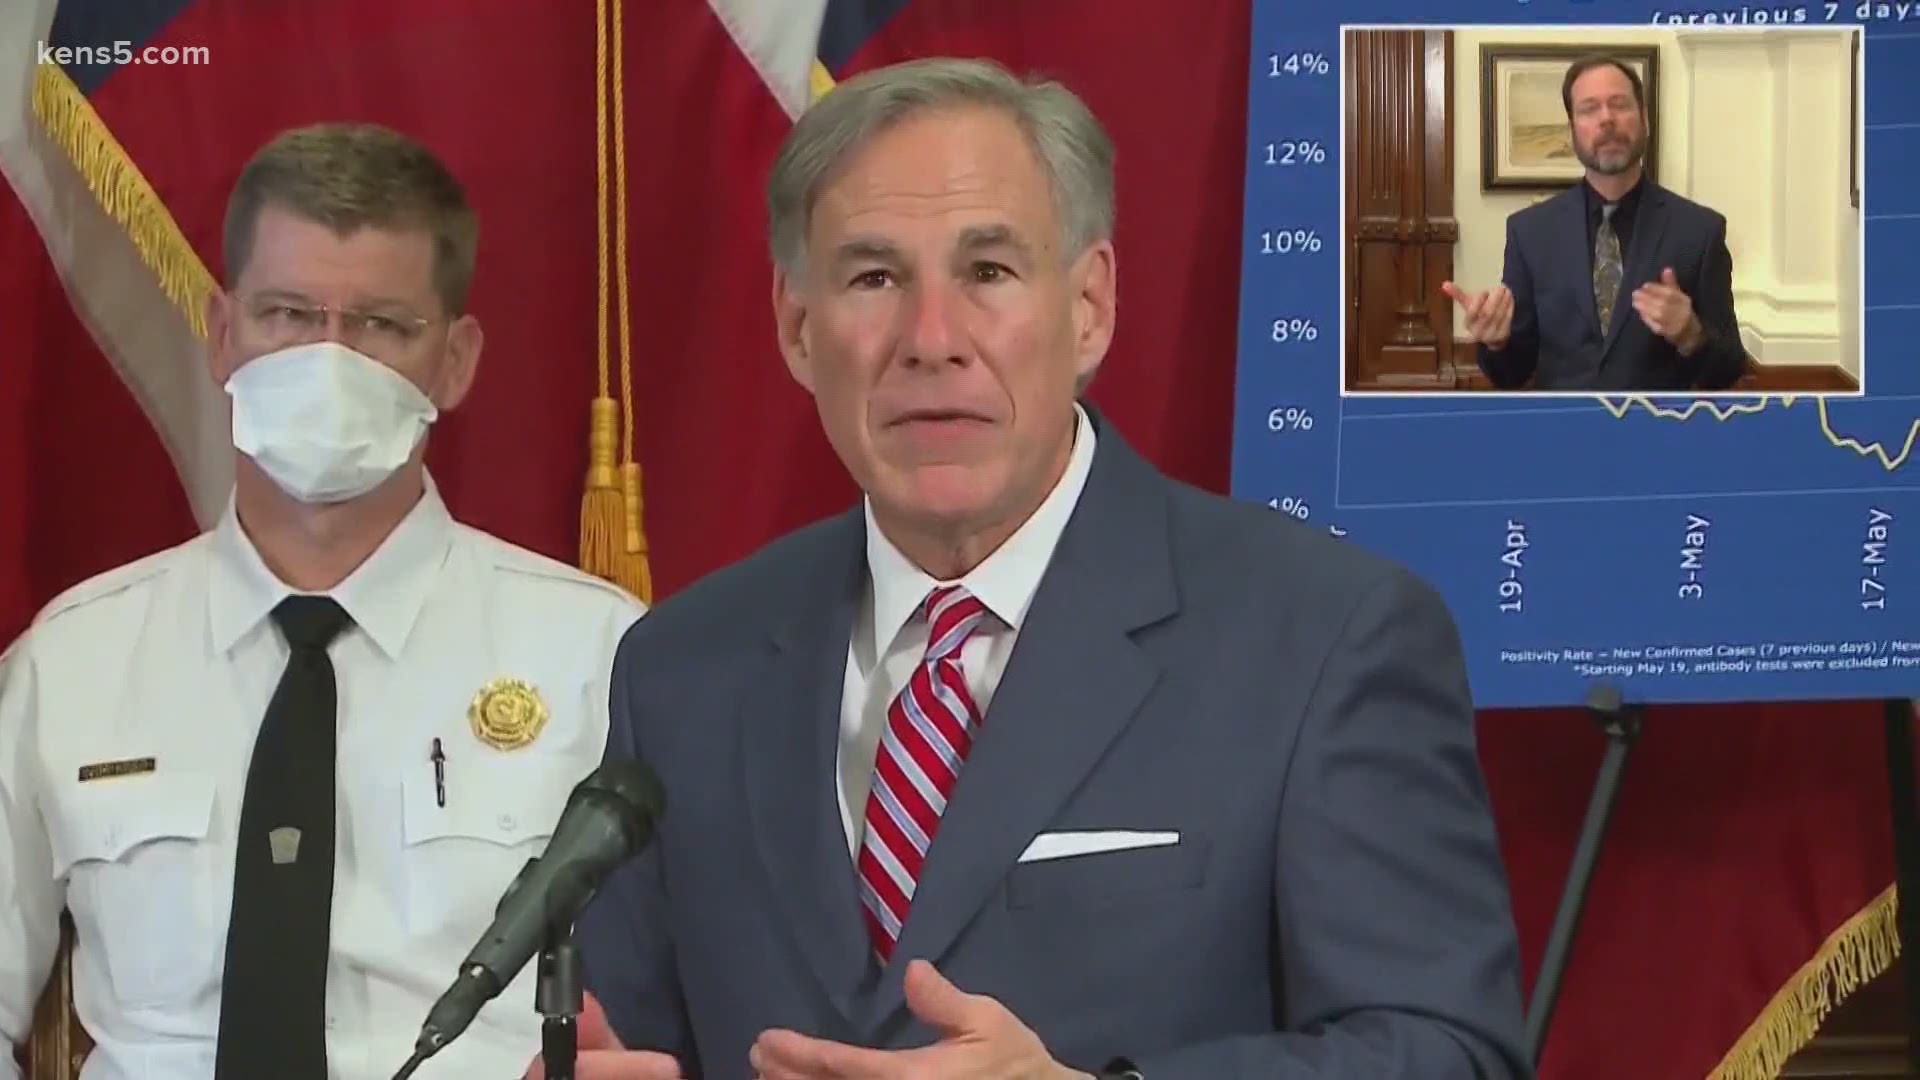 Gov. Abbott says Texas is surging tests in hot spots, working with hospitals on treatment capacity and encouraging Texans to follow health measures.